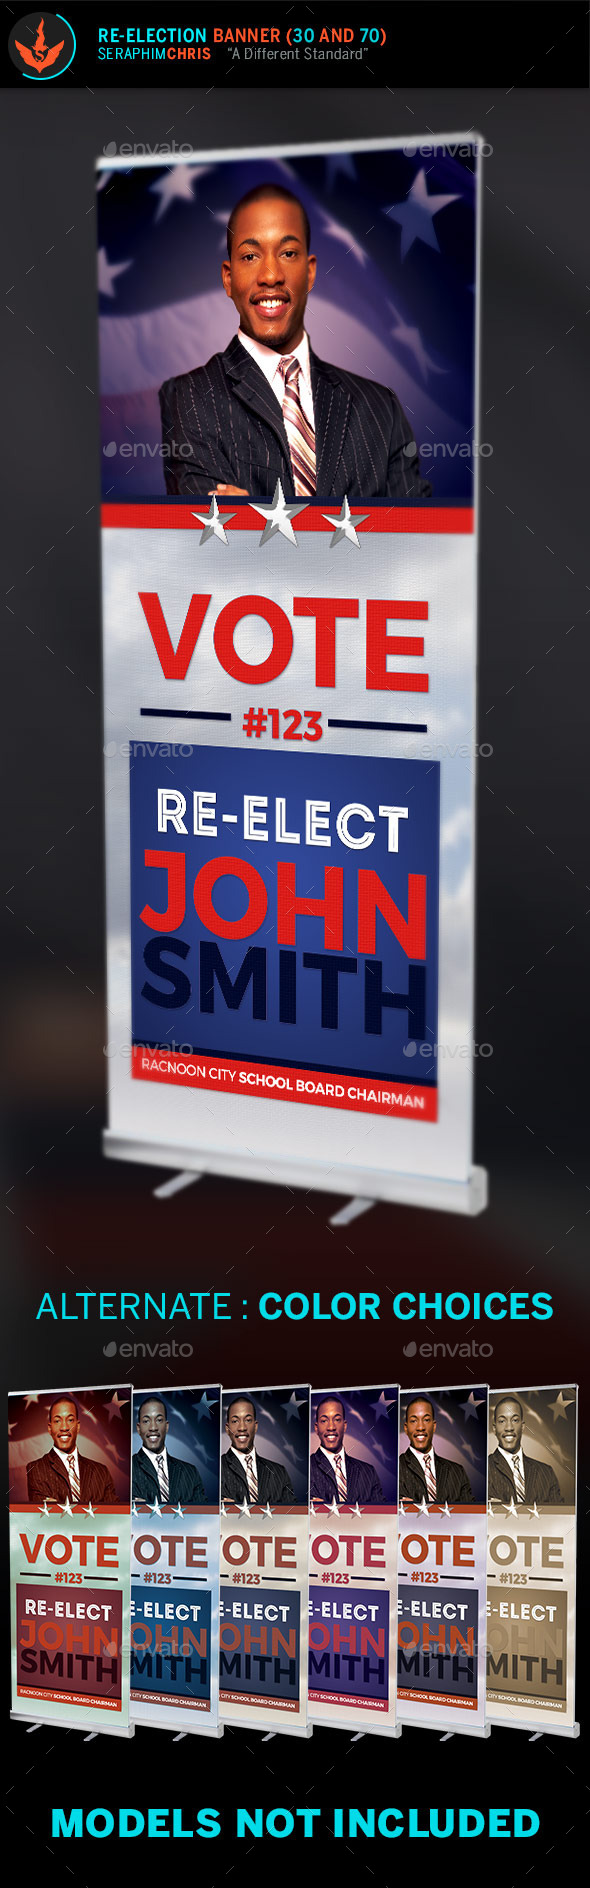 re-election-banner-template-by-seraphimchris-graphicriver